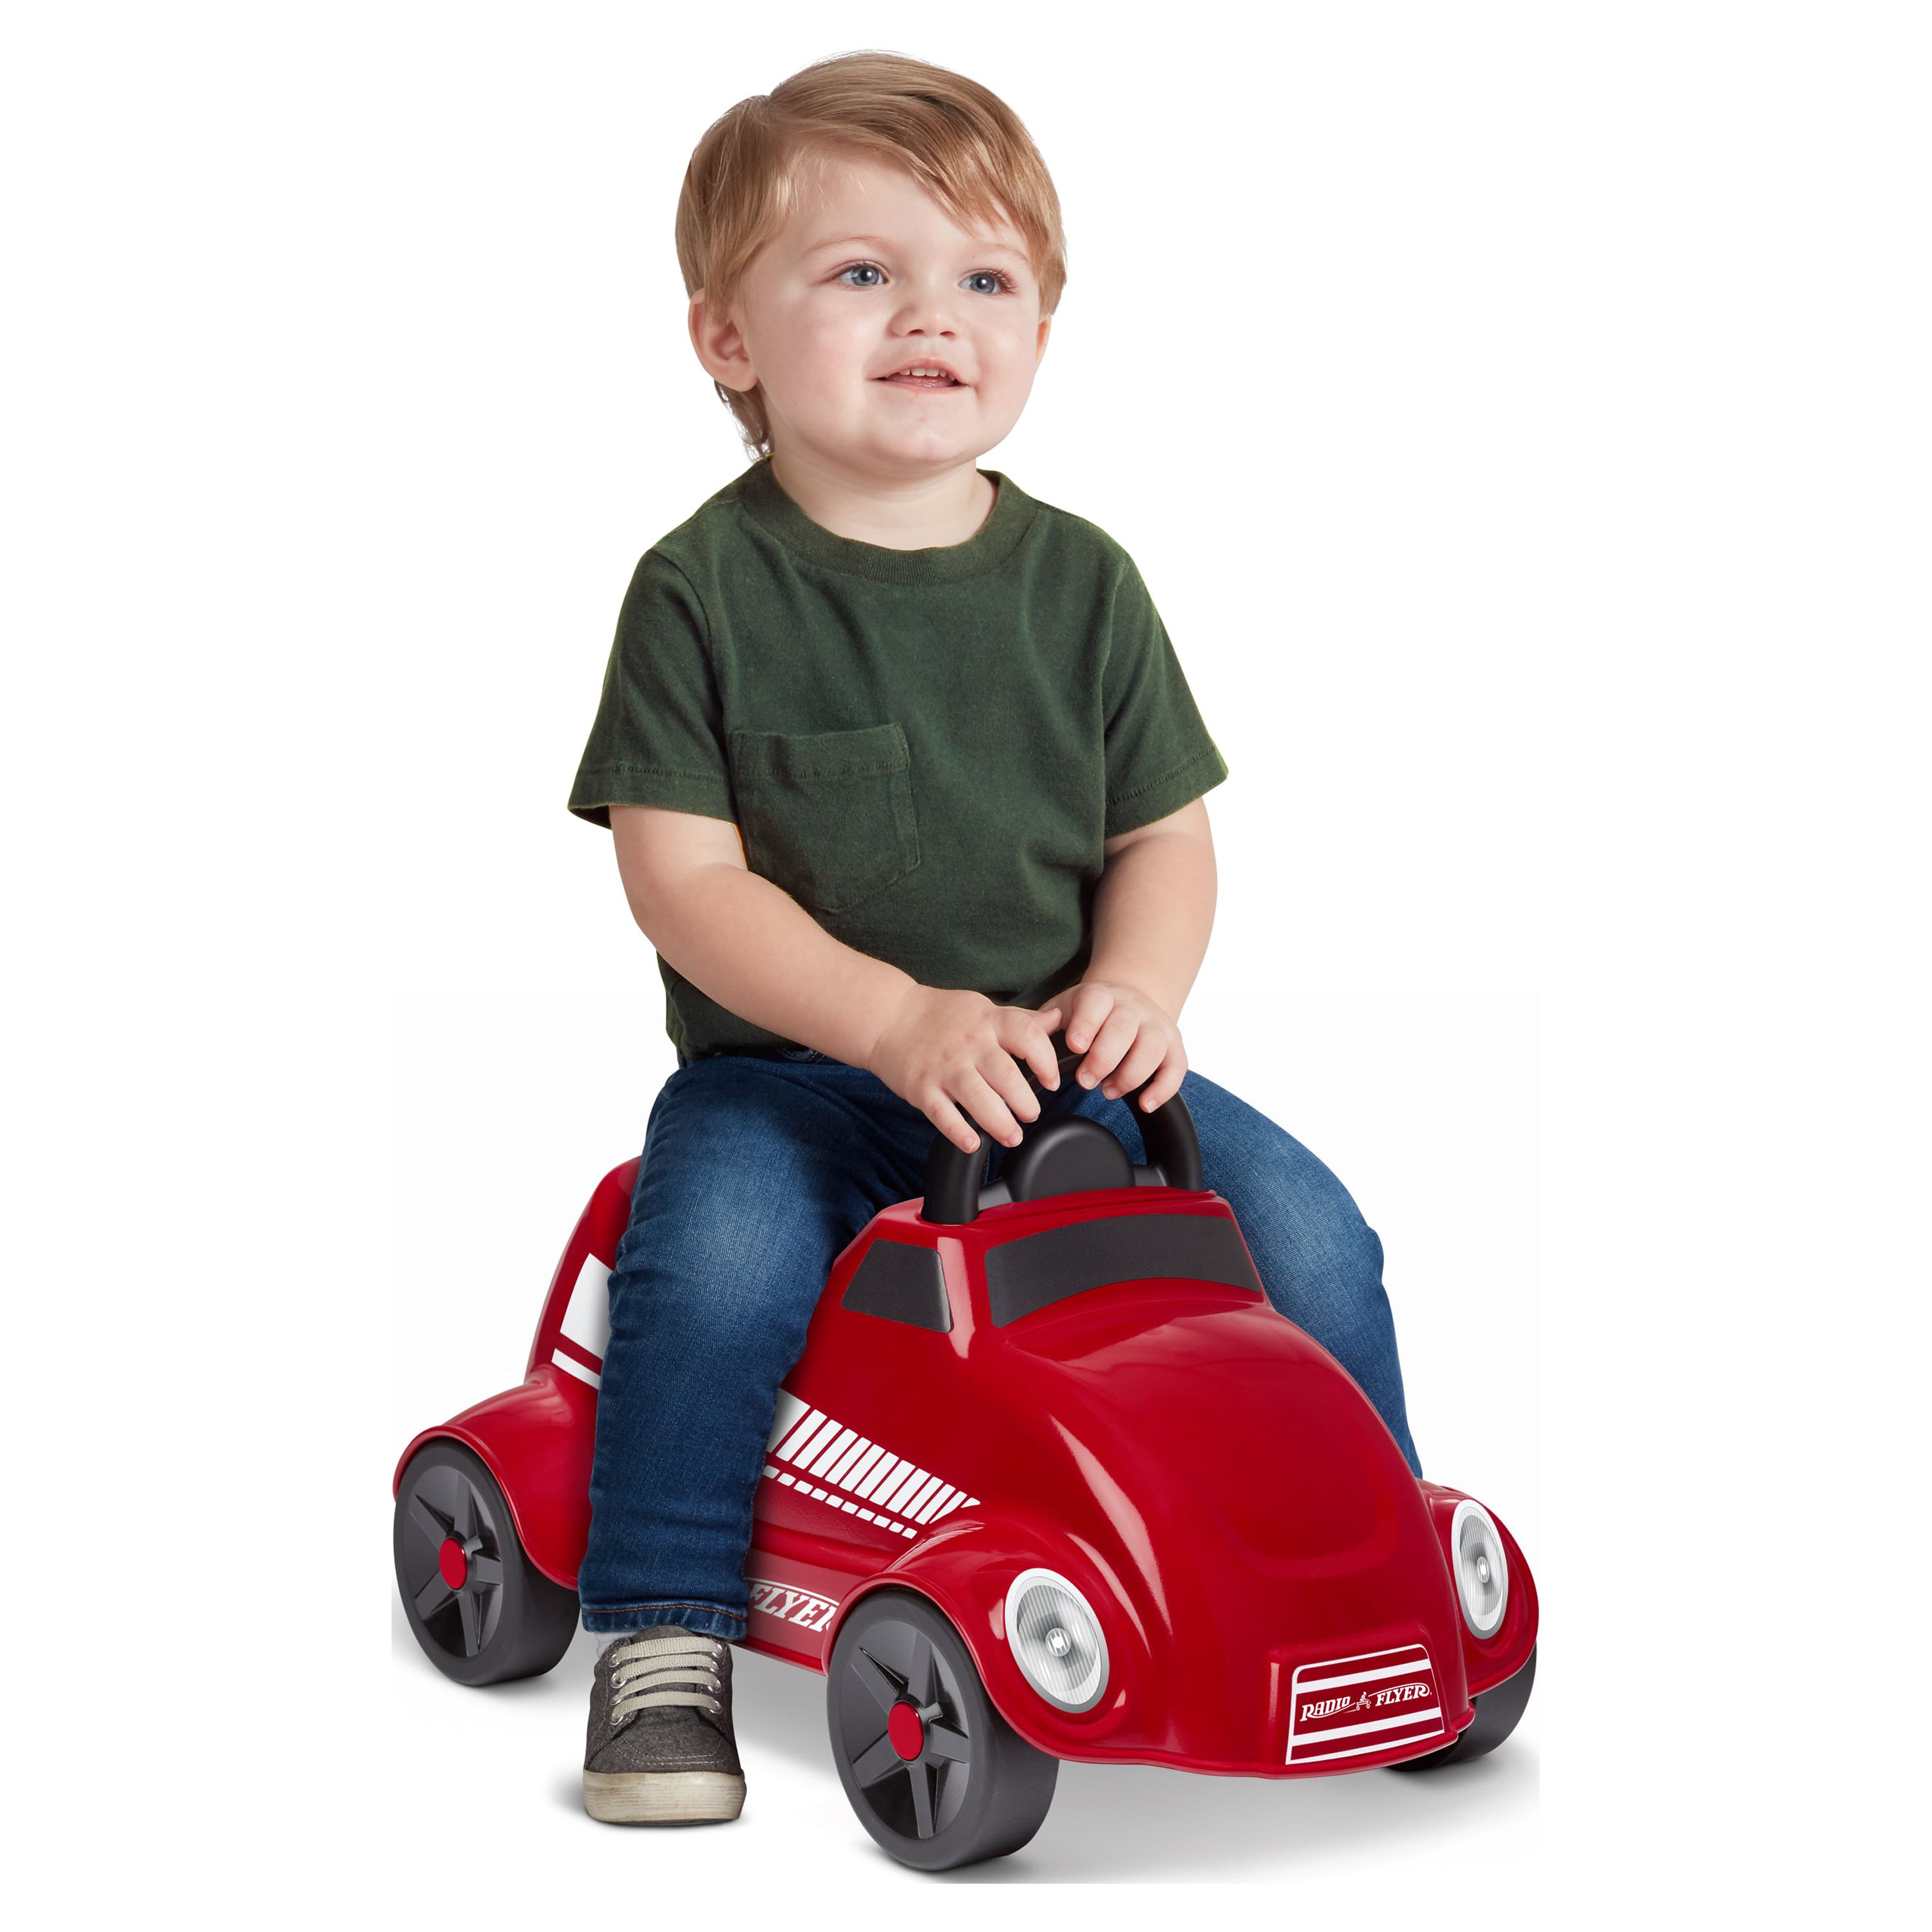 Radio Flyer, My 1st Race Car, Ride-on for Kids, Red, Kids 1-3 Years - image 4 of 7